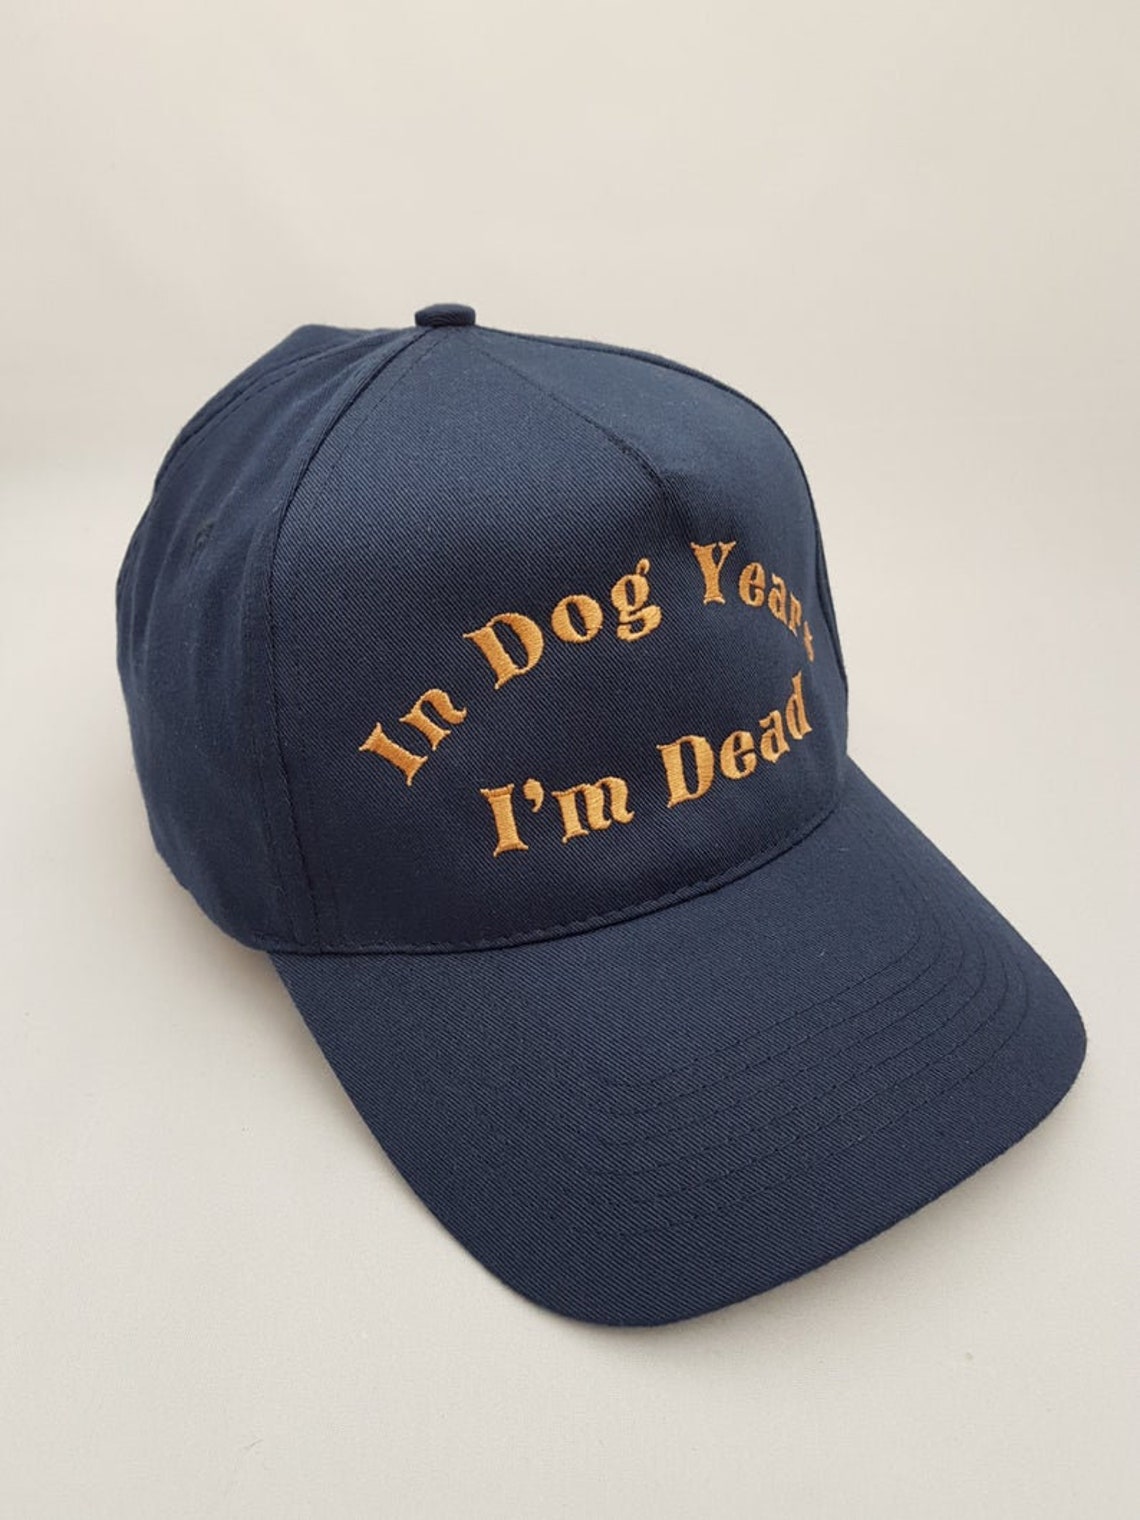 In Dog Years I'M Dead Embroidered Baseball Cap Hat | Etsy